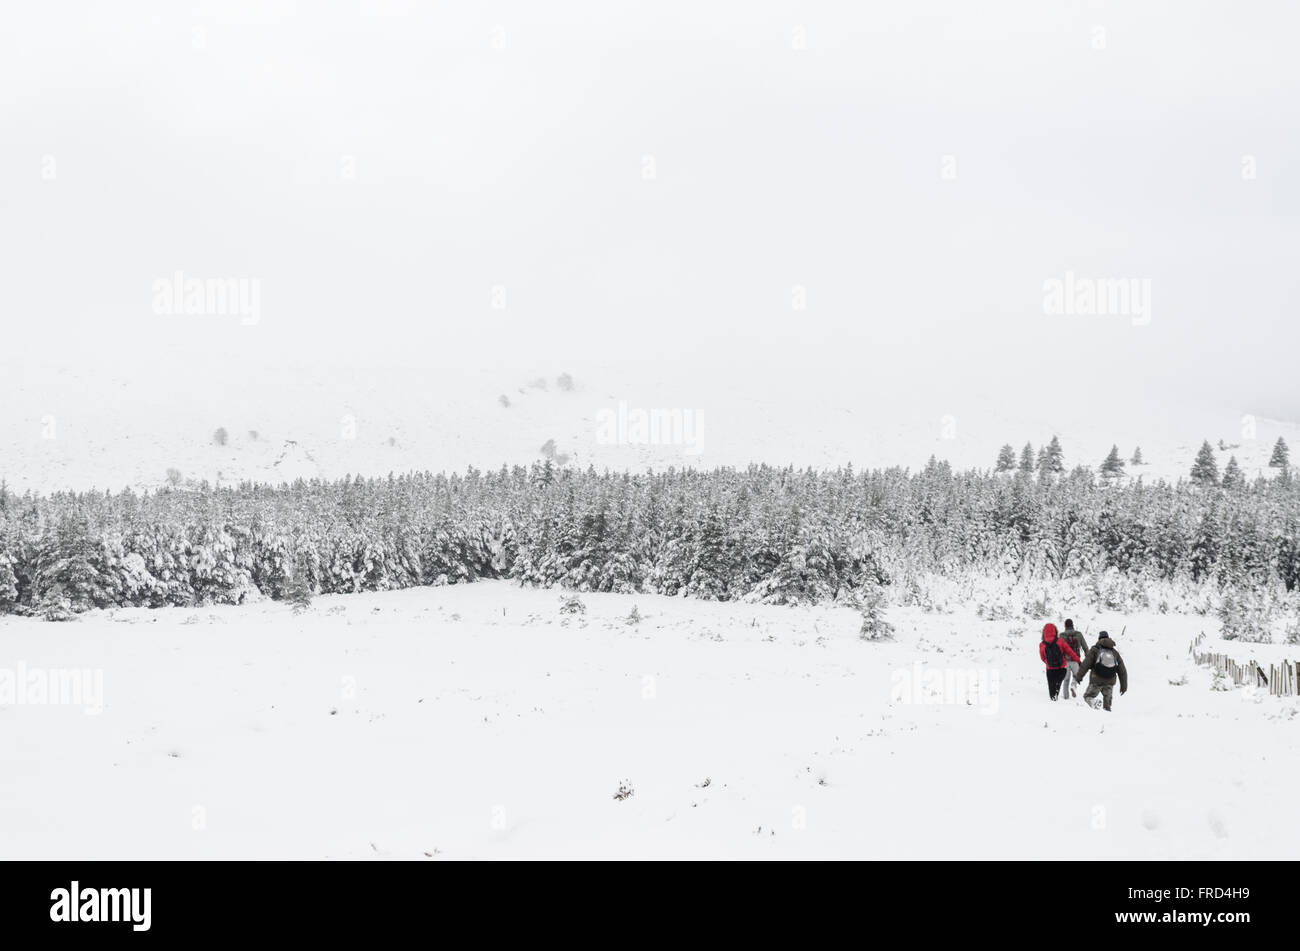 People walking in the snow towards a pine forest Stock Photo